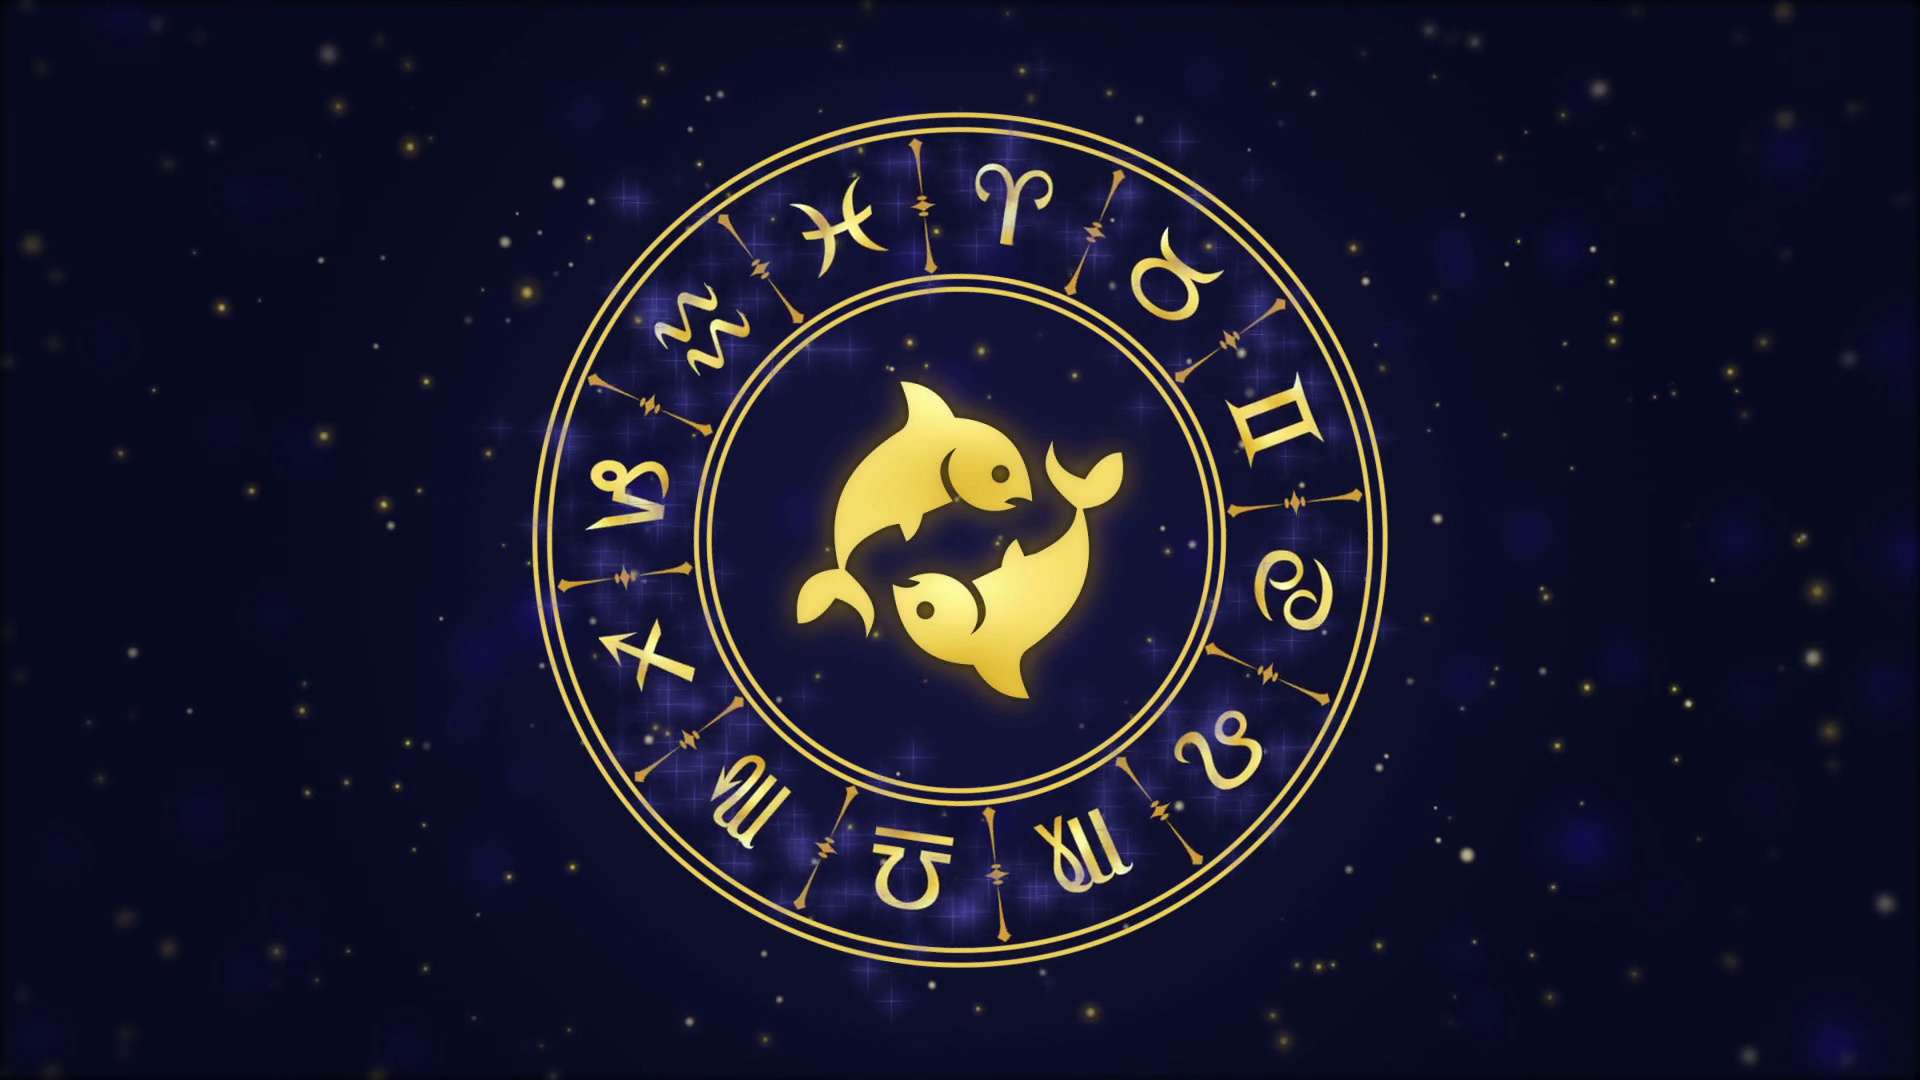 Pisces Zodiac Sign, Free wallpapers, Zodiac sign backgrounds, Personal expression, 1920x1080 Full HD Desktop